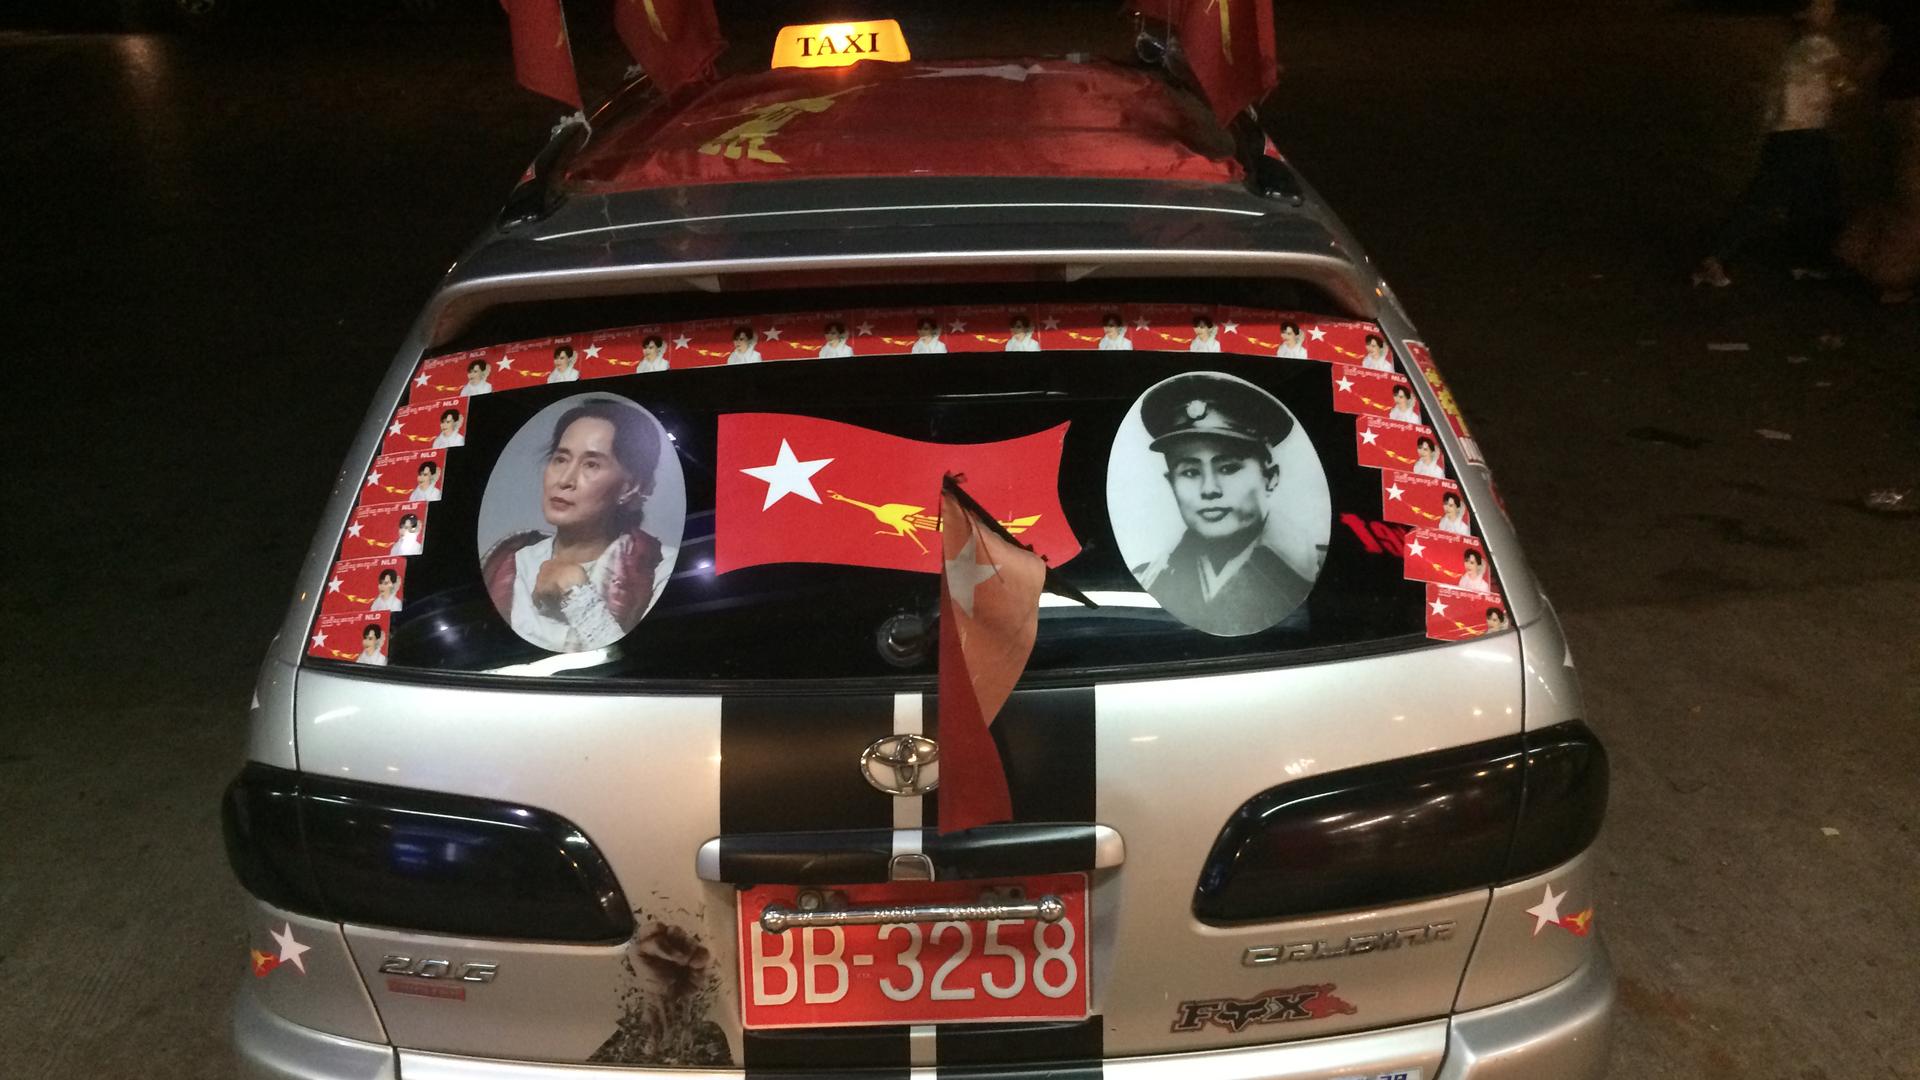 A taxi in Yangon decorated for Myanmar's election: a picture of Aung San Suu Kyi (l), and her late father, Aung San (r), who is revered as the father of modern Burma.